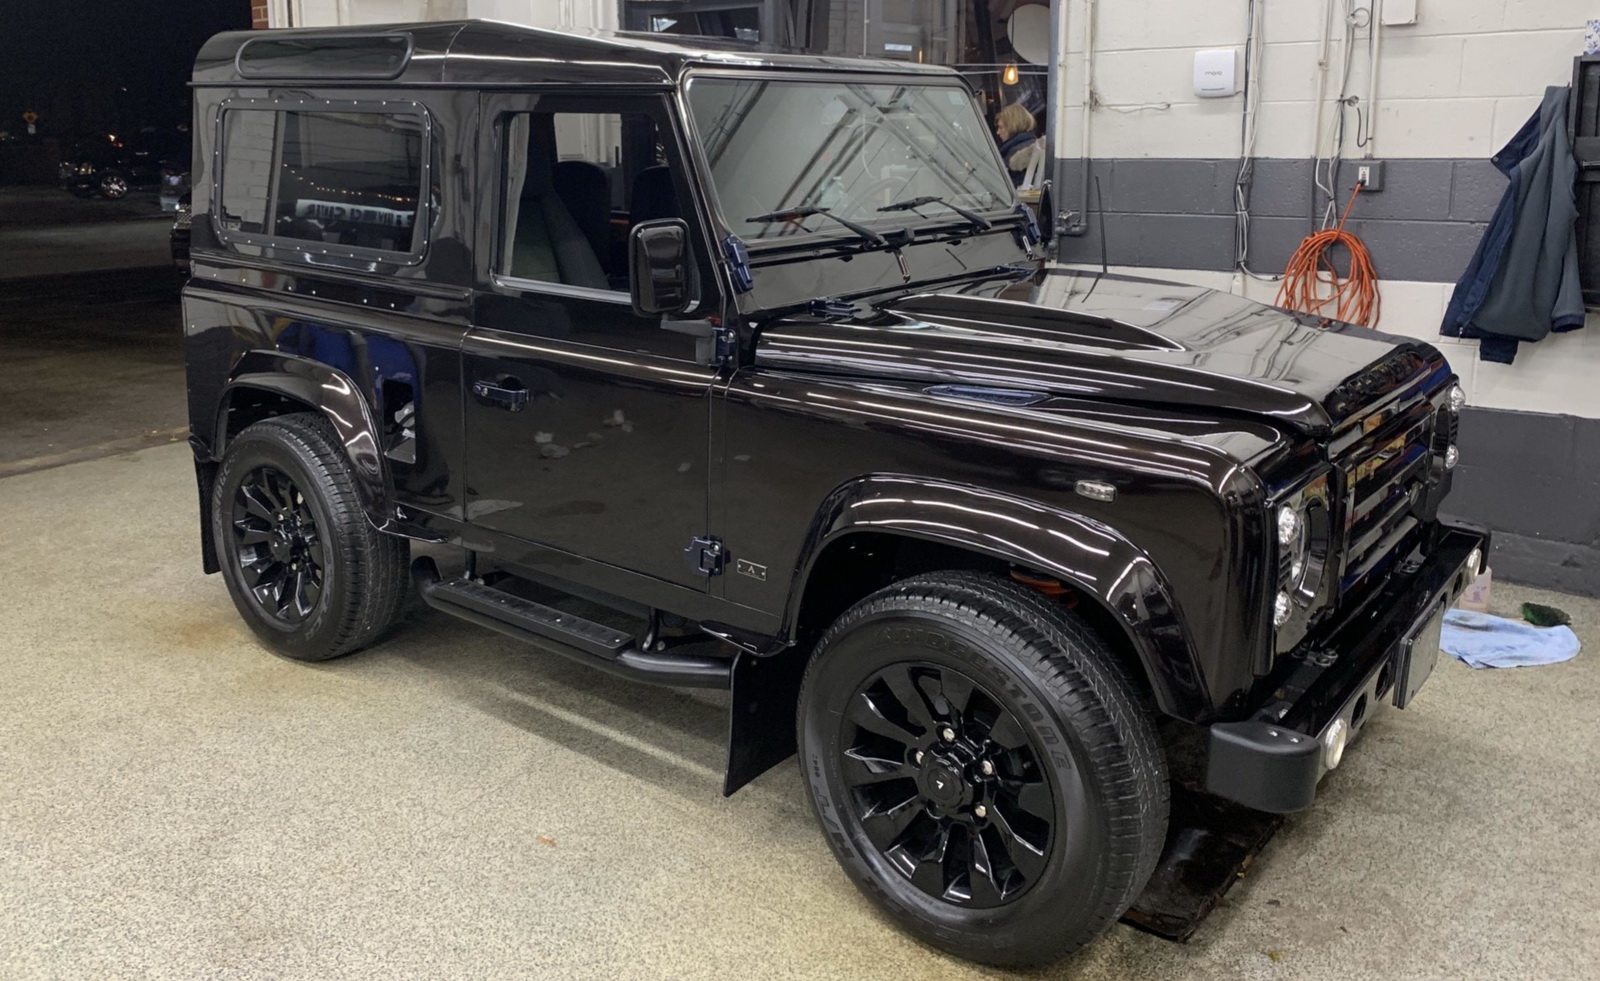 This 1988 Modded Land Rover Defender Is Ruggedness At Its